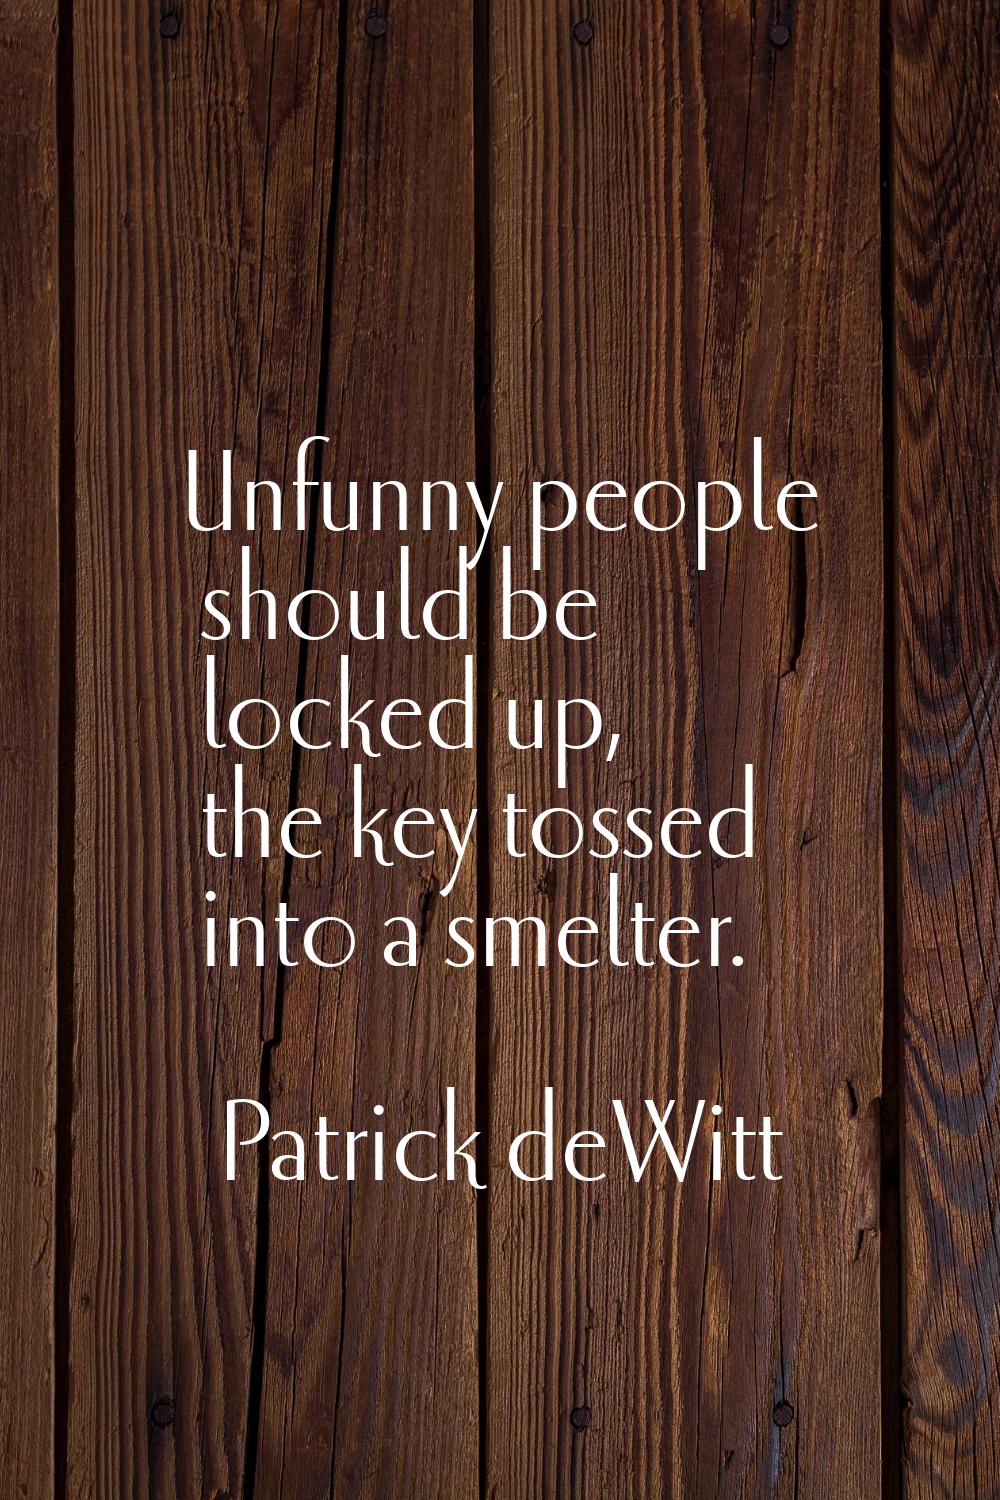 Unfunny people should be locked up, the key tossed into a smelter.